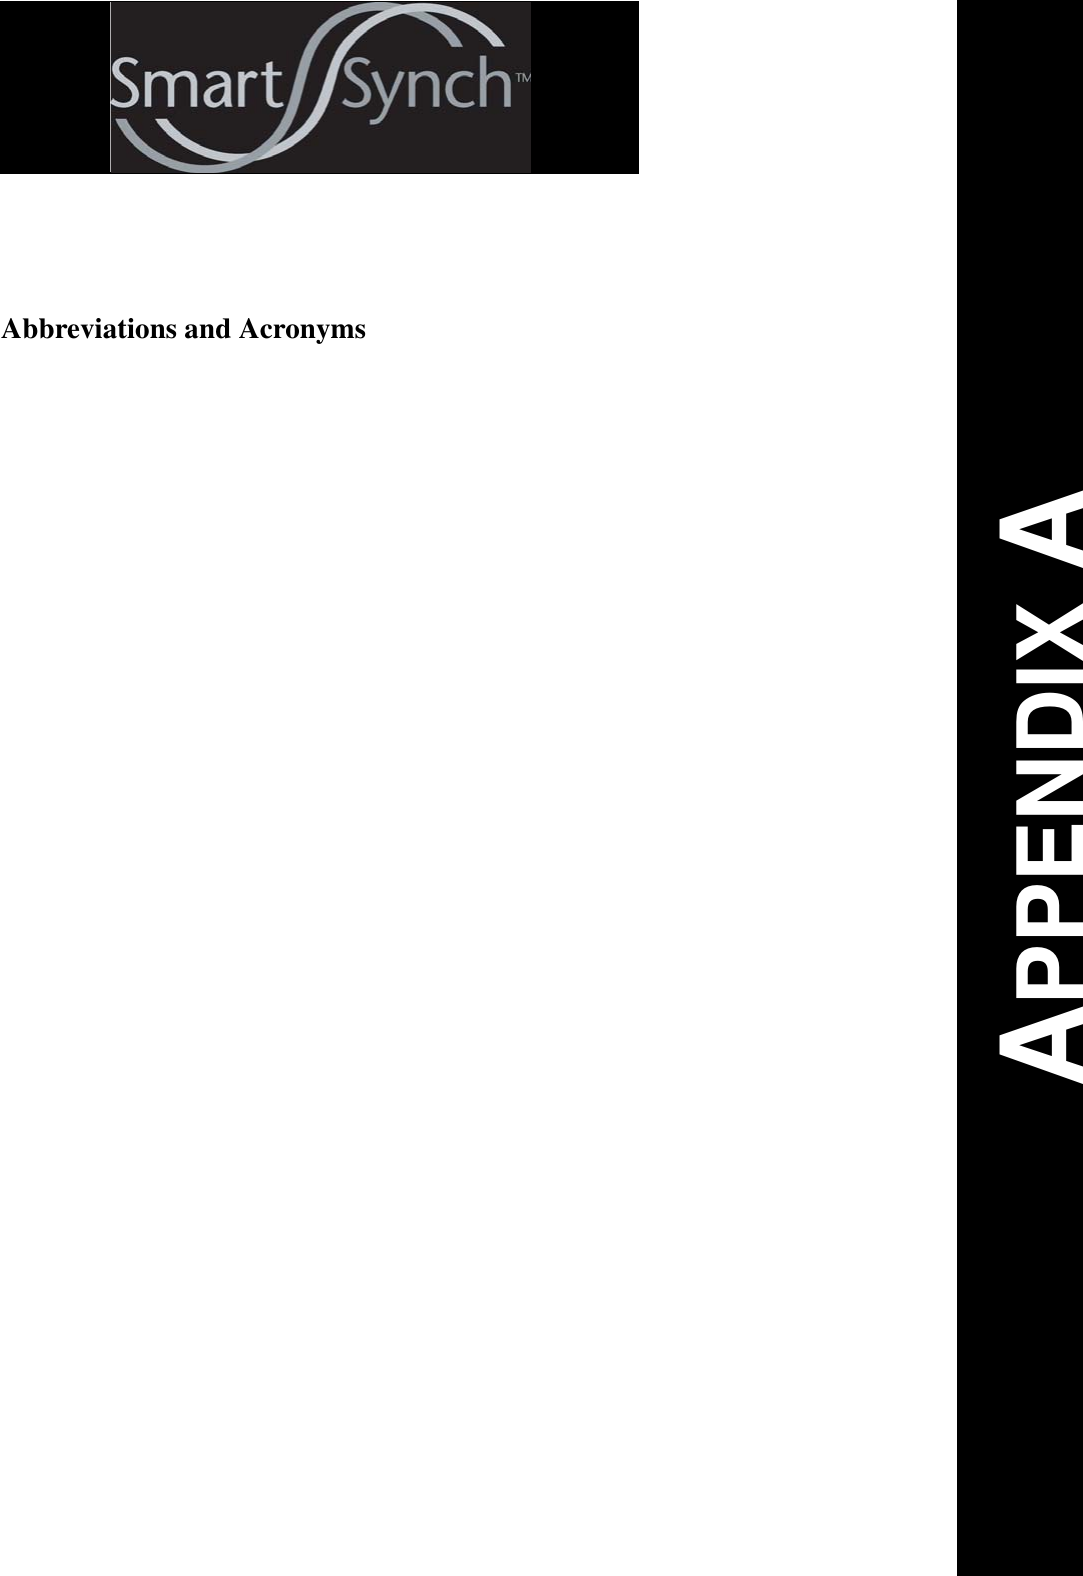 APPENDIX AAbbreviations and Acronyms